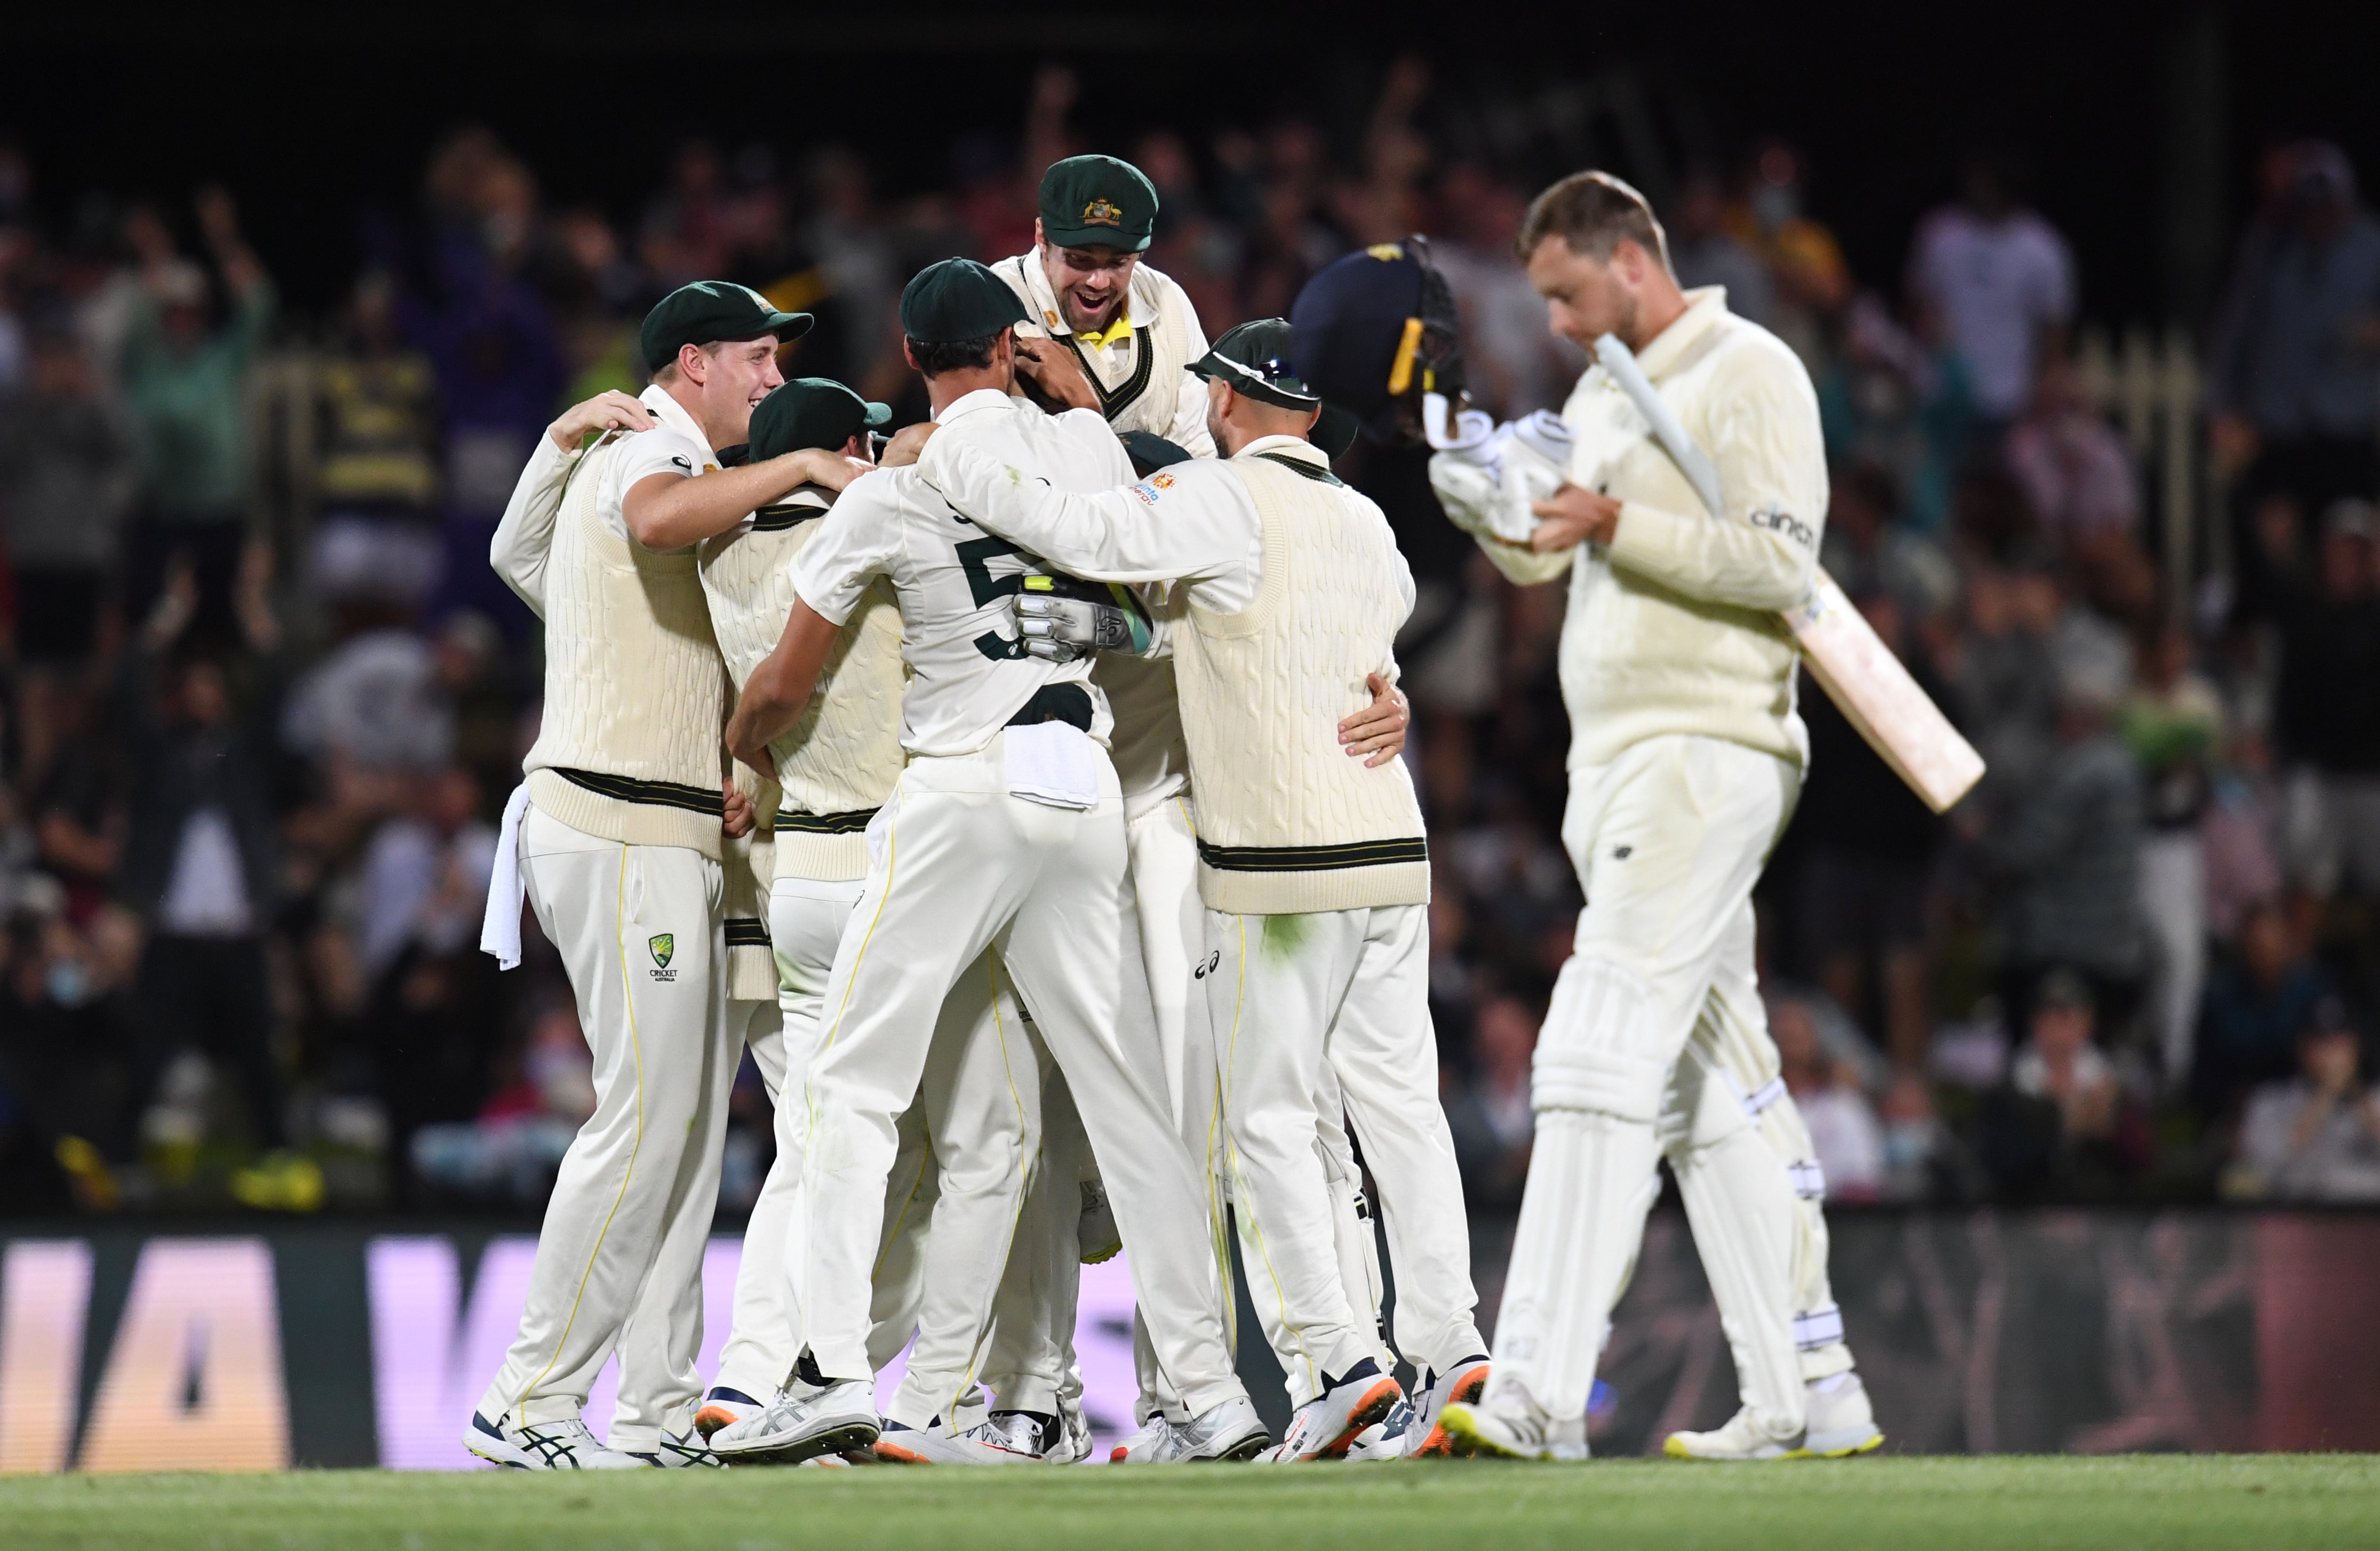 Australia celebrate winning the fifth Ashes Test in Hobart and sealing a 4-0 series win (Darren England via AAP)